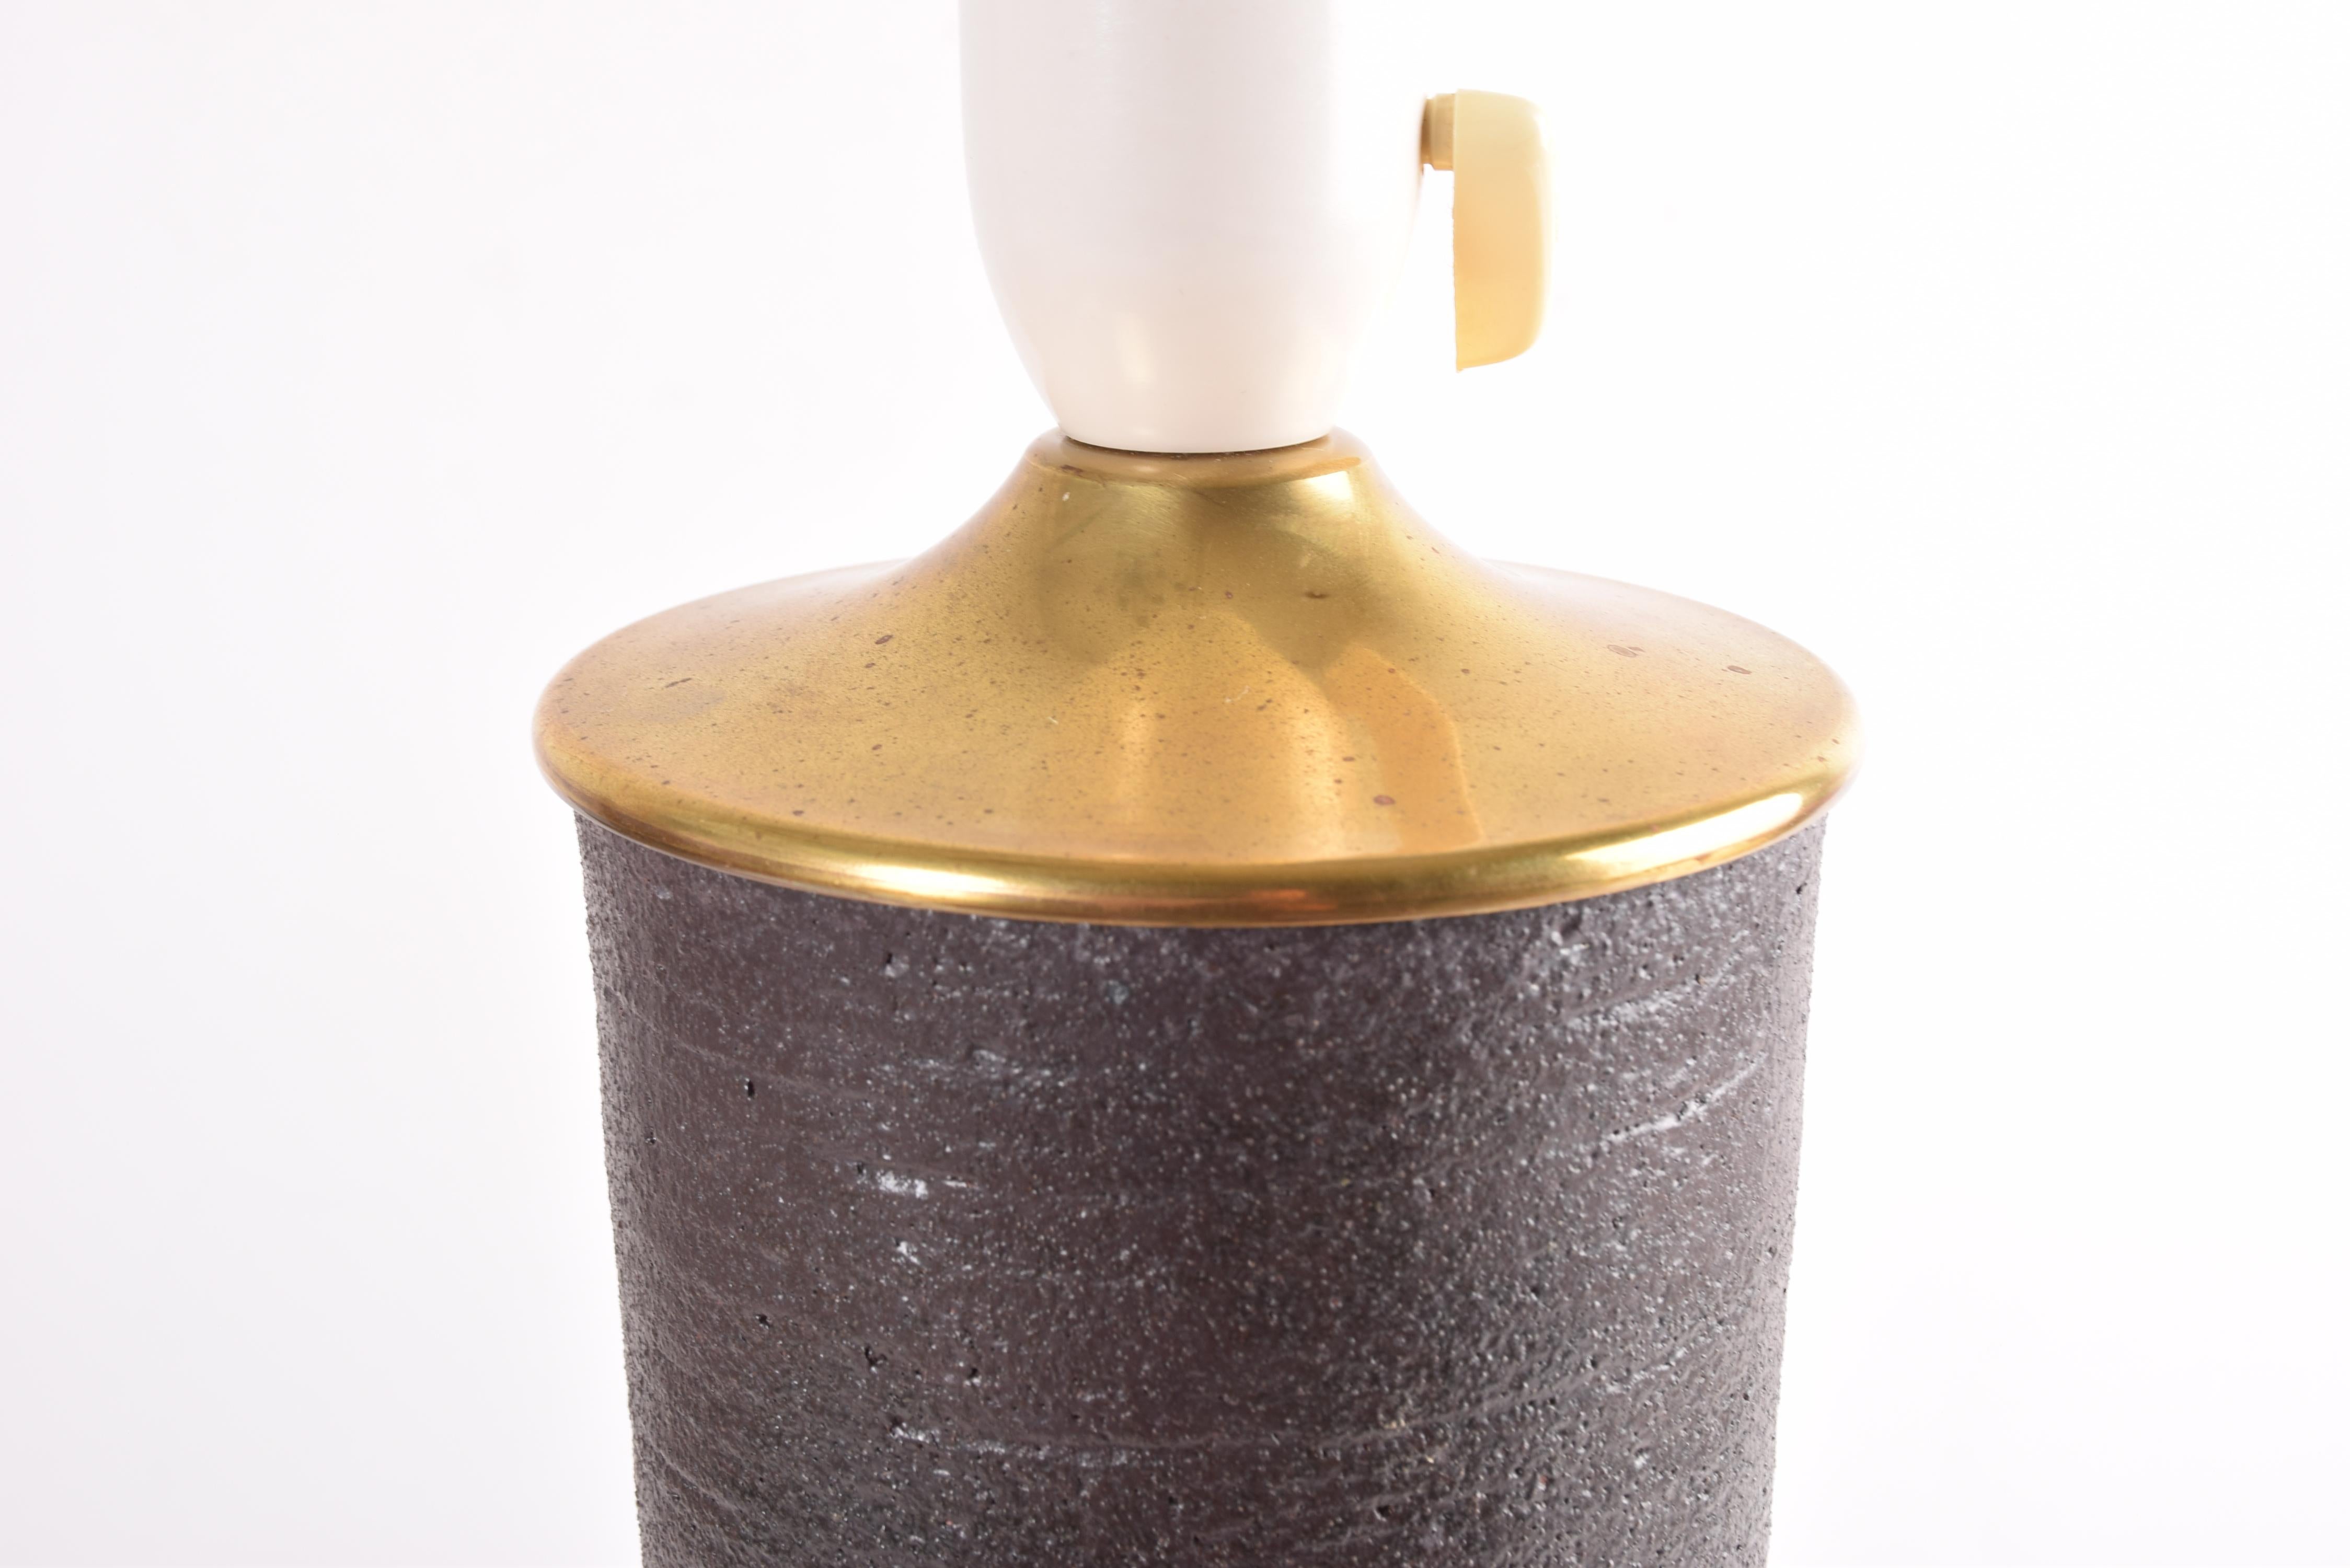 Ceramic Midcentury Arabia Finland Tall Table Lamp Brown with Brass, Liisa Hallamaa 1960s For Sale